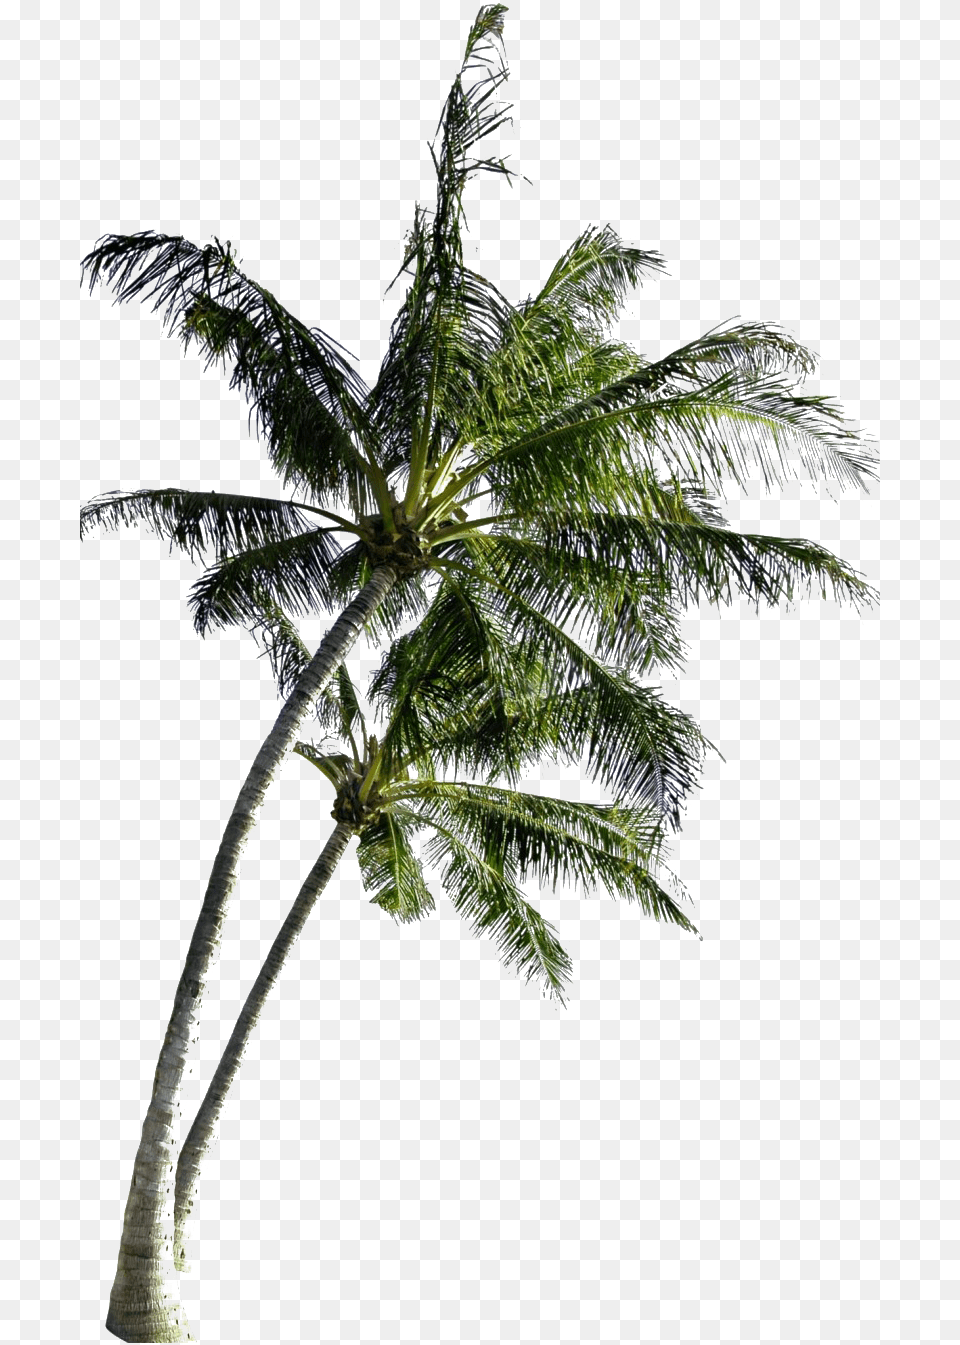 Coconut Tree Image All Coconut Tree With Coconut, Leaf, Palm Tree, Plant, Outdoors Free Transparent Png